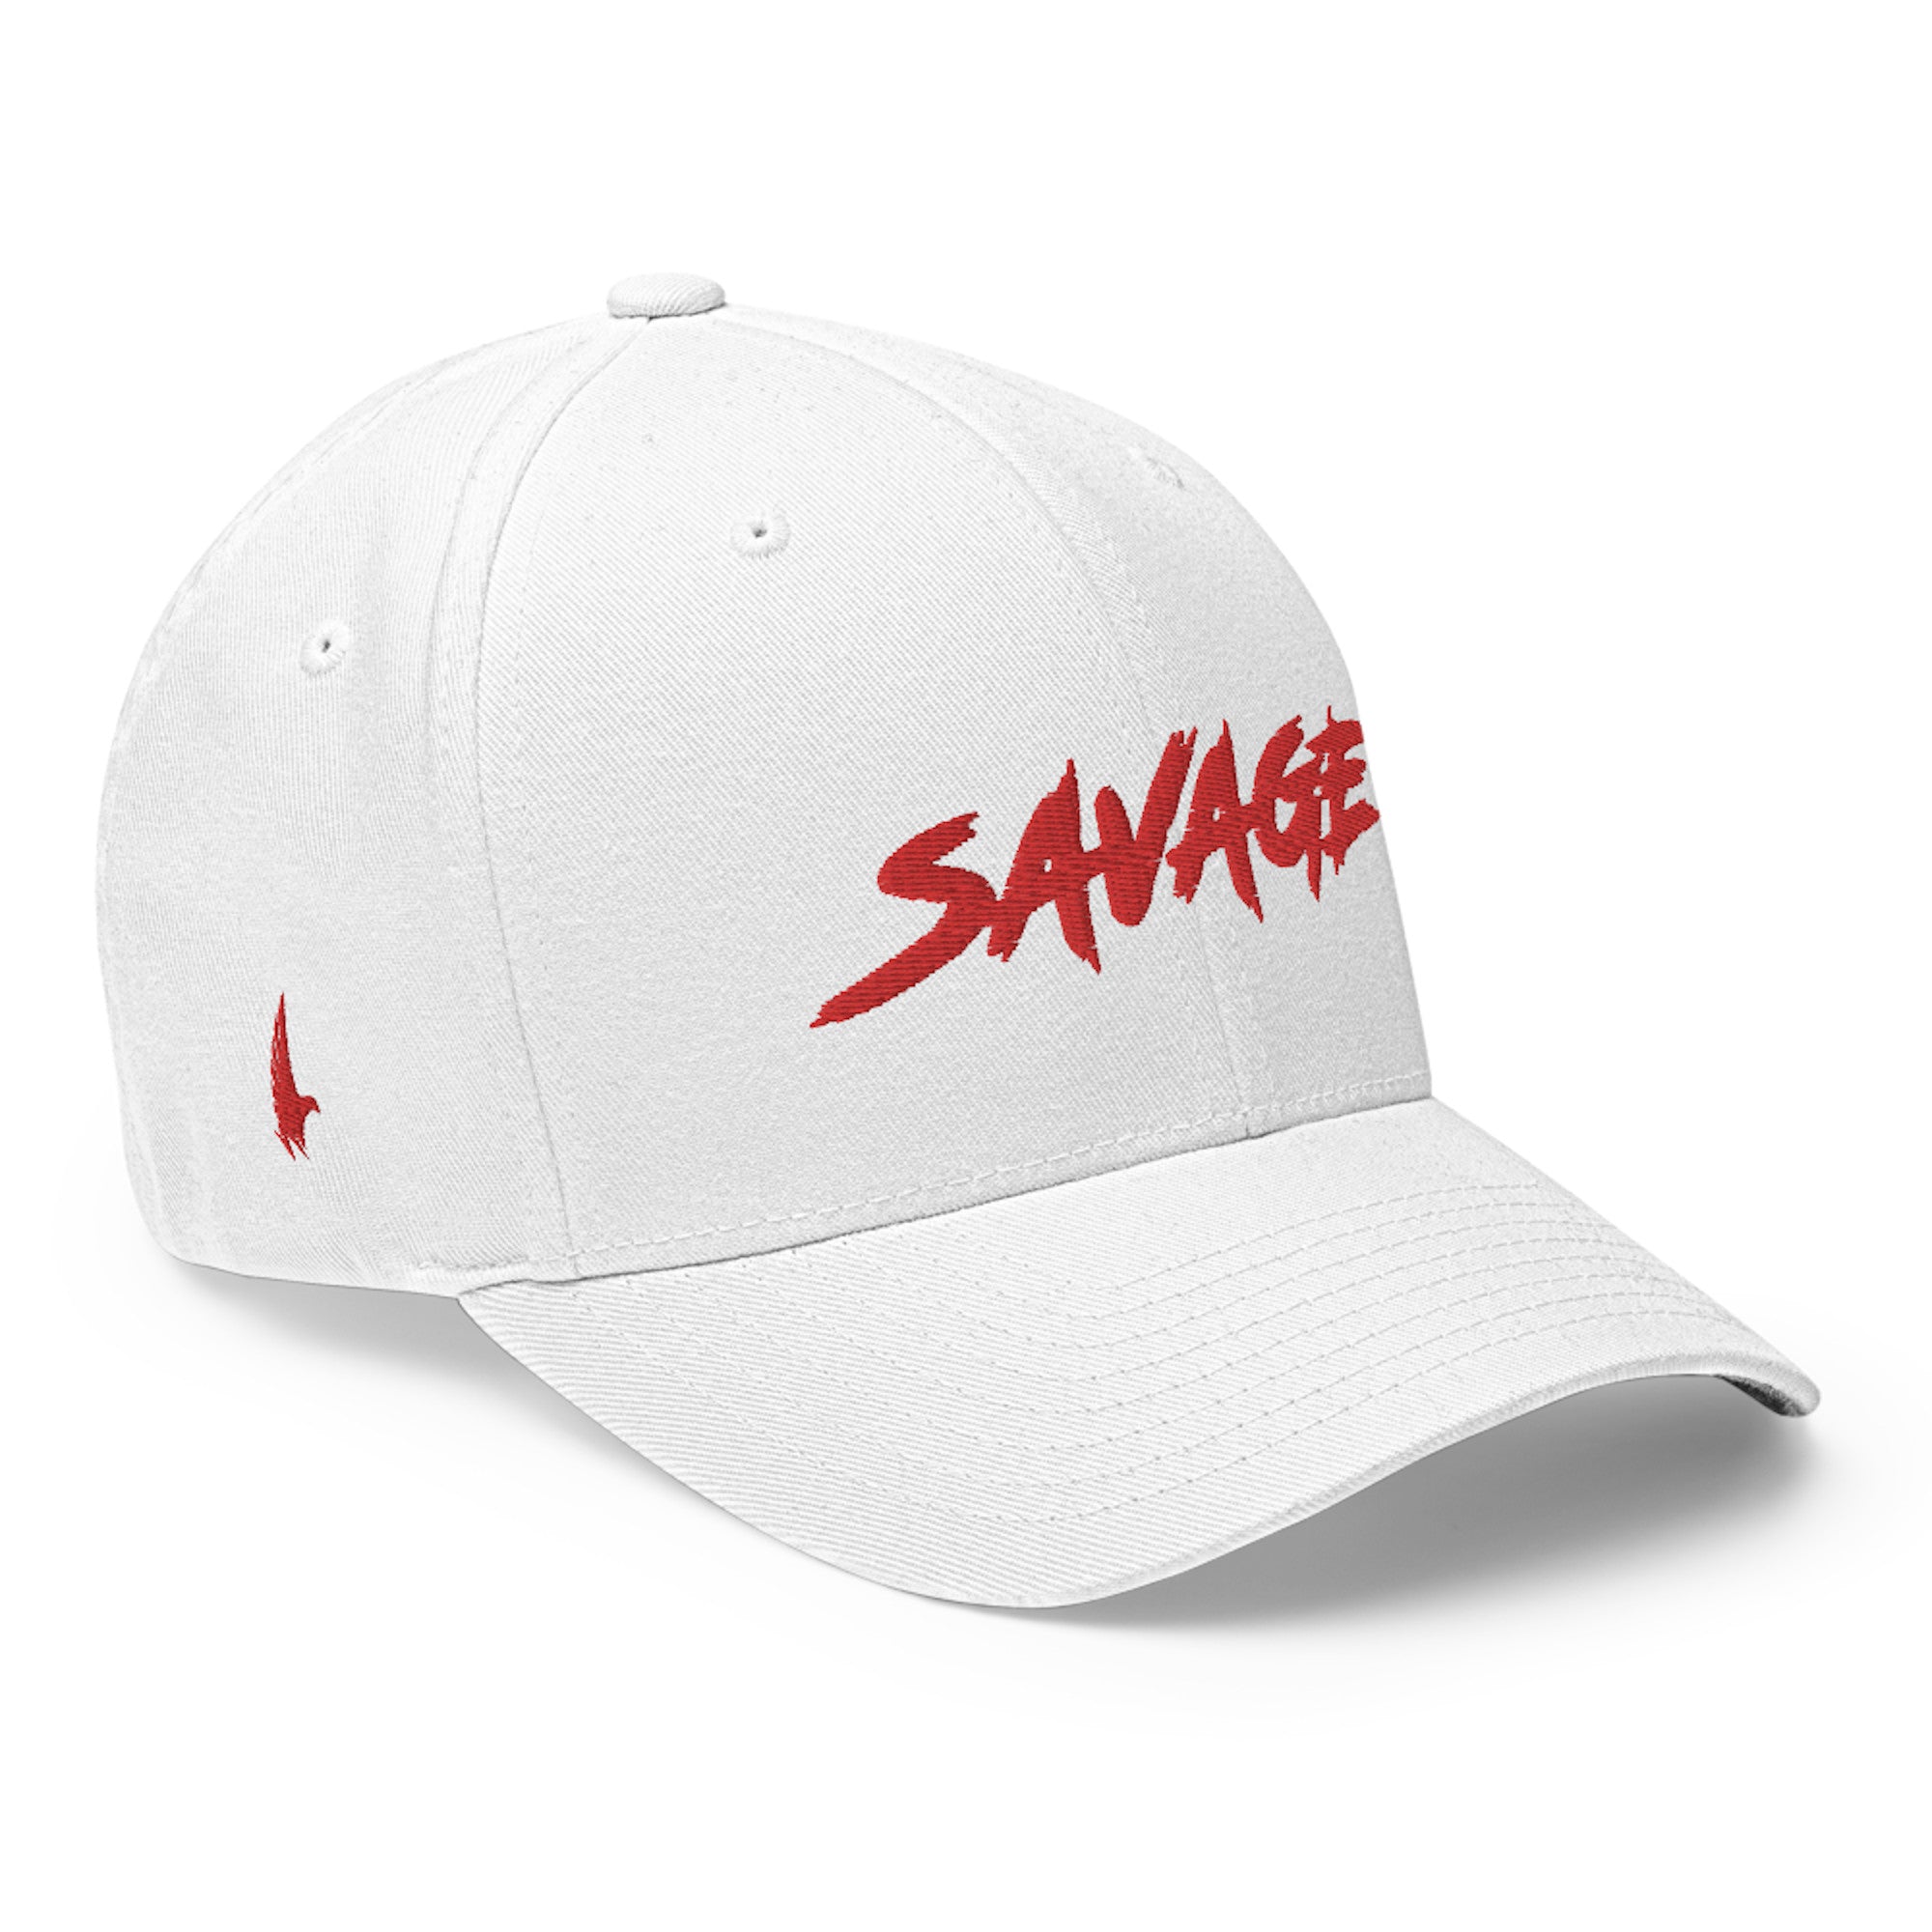 Savage Fitted Hat White Red - Loyalty Vibes